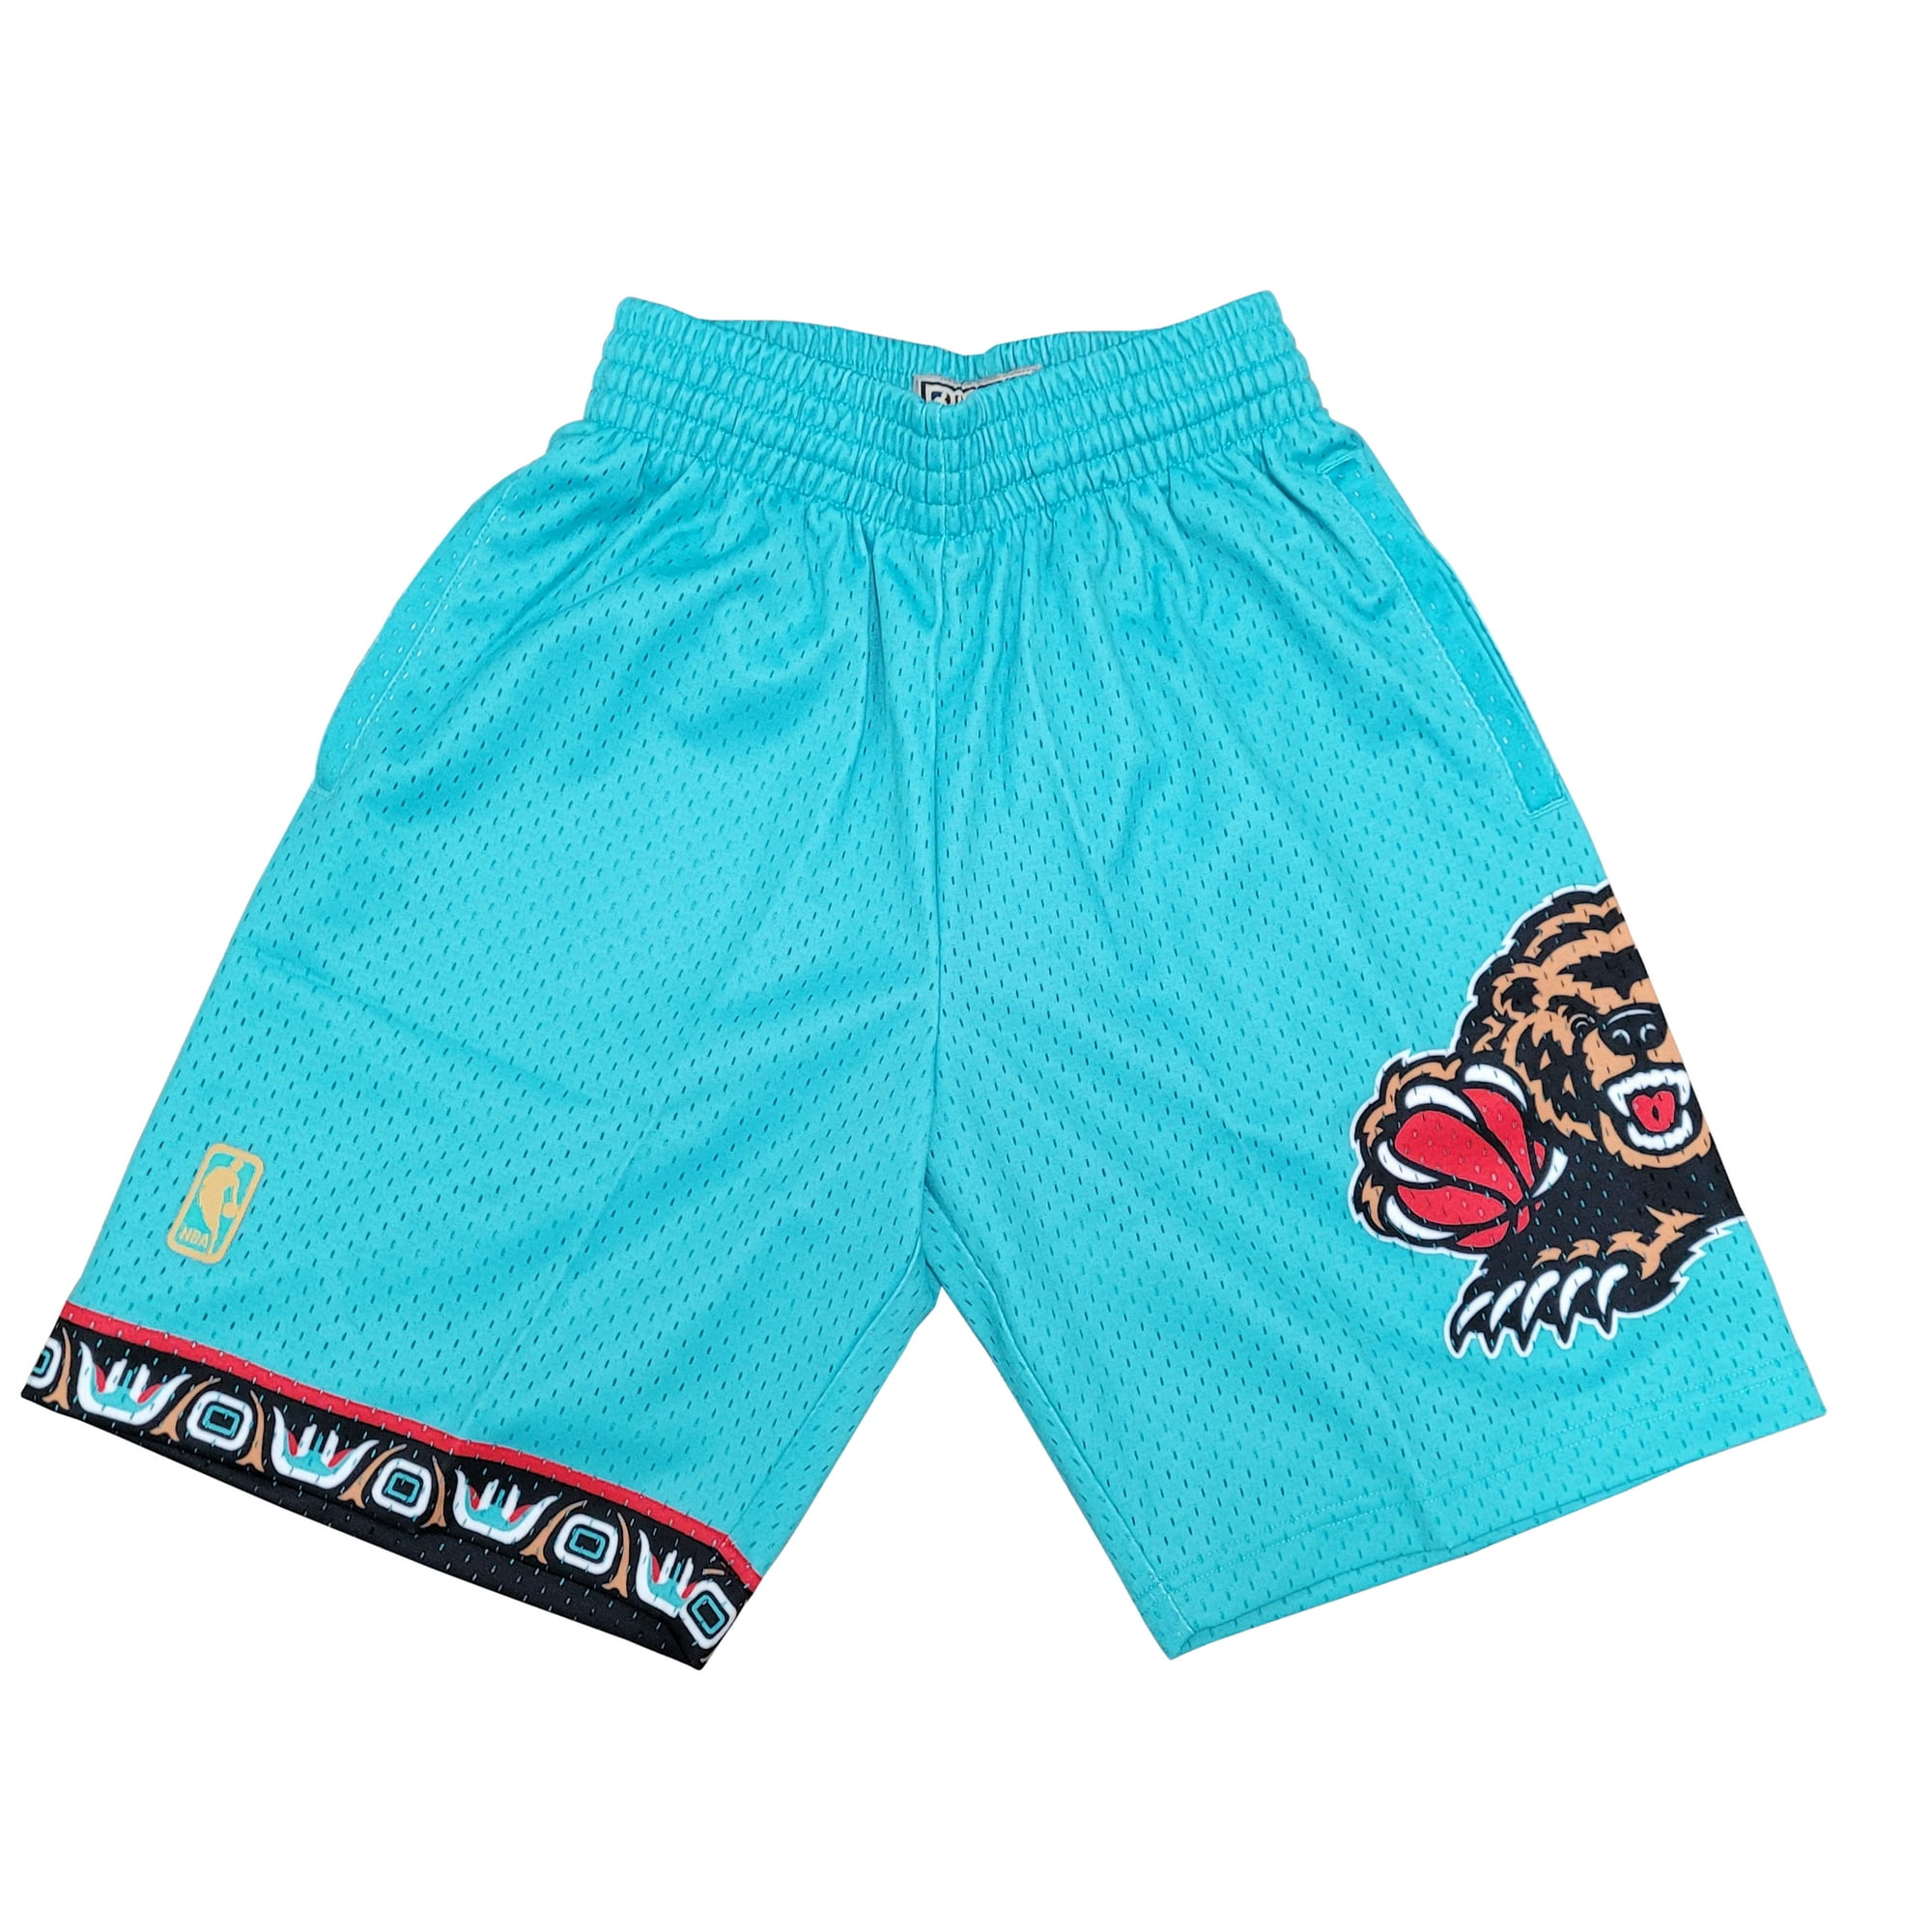 Mitchell & Ness Teal NBA Vancouver Grizzlies 96-97 Road Swingman Shorts -  XS 